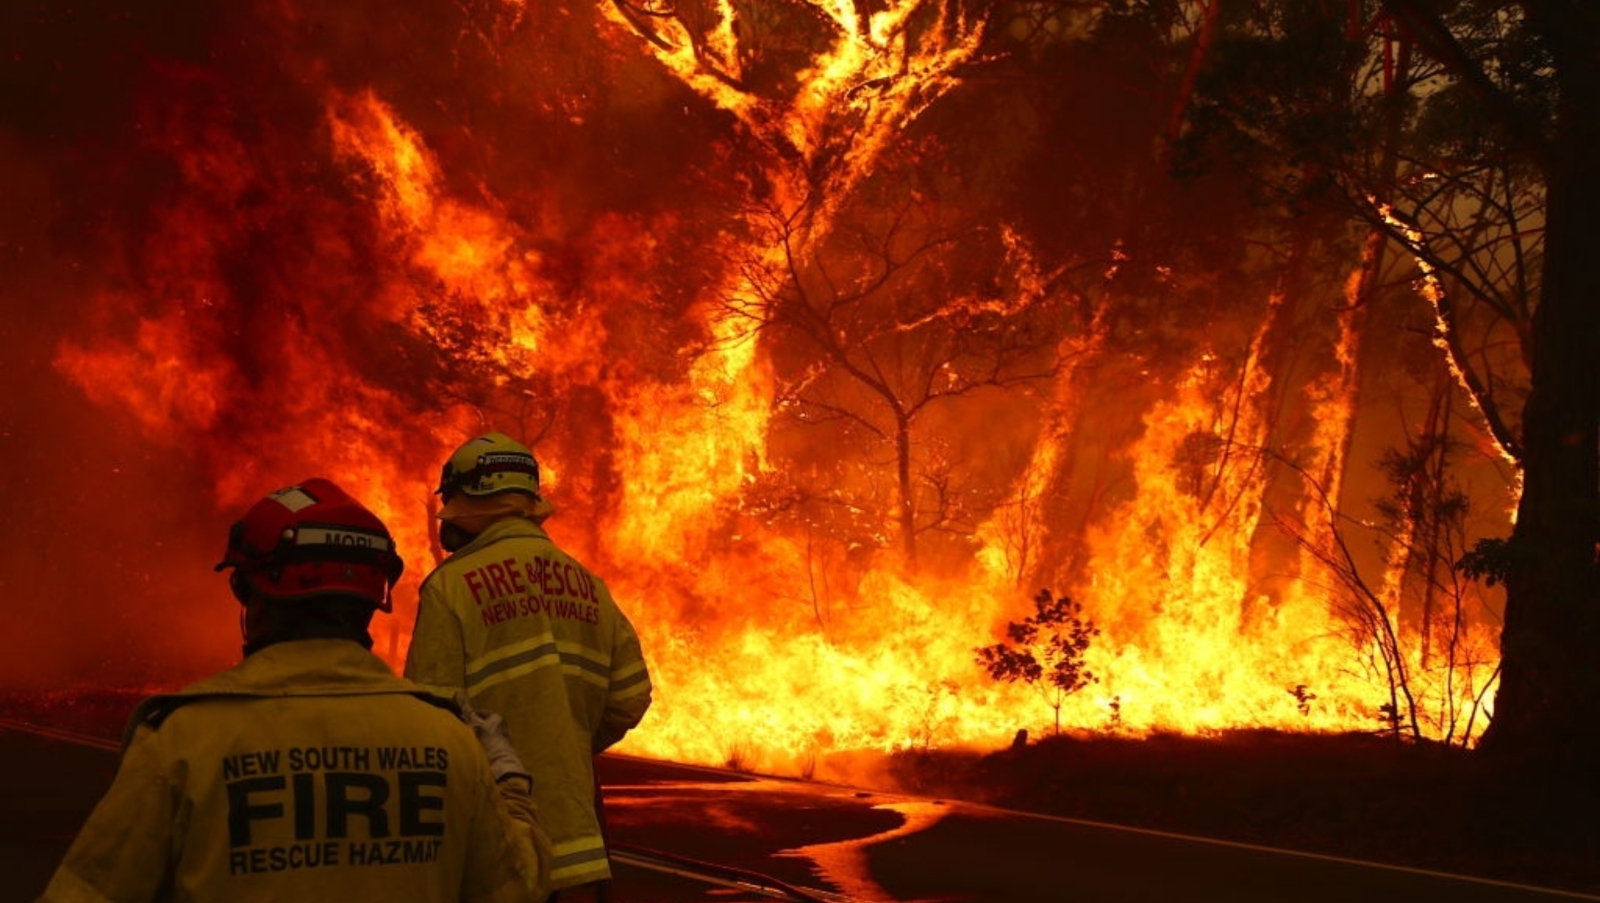 Fire and rescue personnel run to move their truck as a bushfire burns next to a major road and homes on the outskirts of the town of Bilpin, Australia, January 28, 2020. Photo via Shutterstock.com